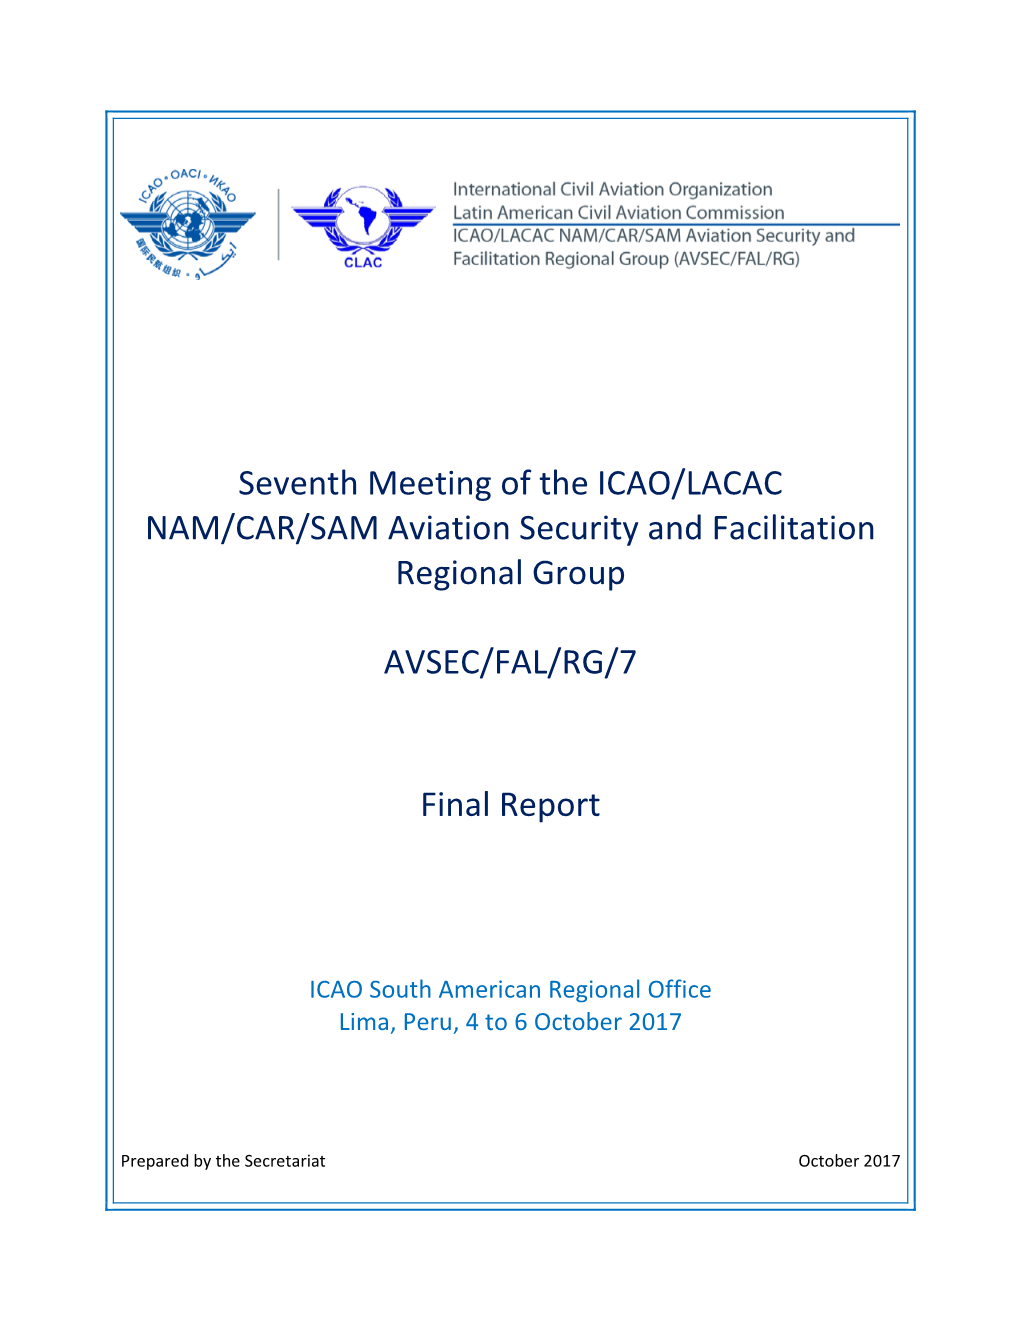 Seventh Meeting of the ICAO/LACAC NAM/CAR/SAM Aviation Security and Facilitation Regional Group